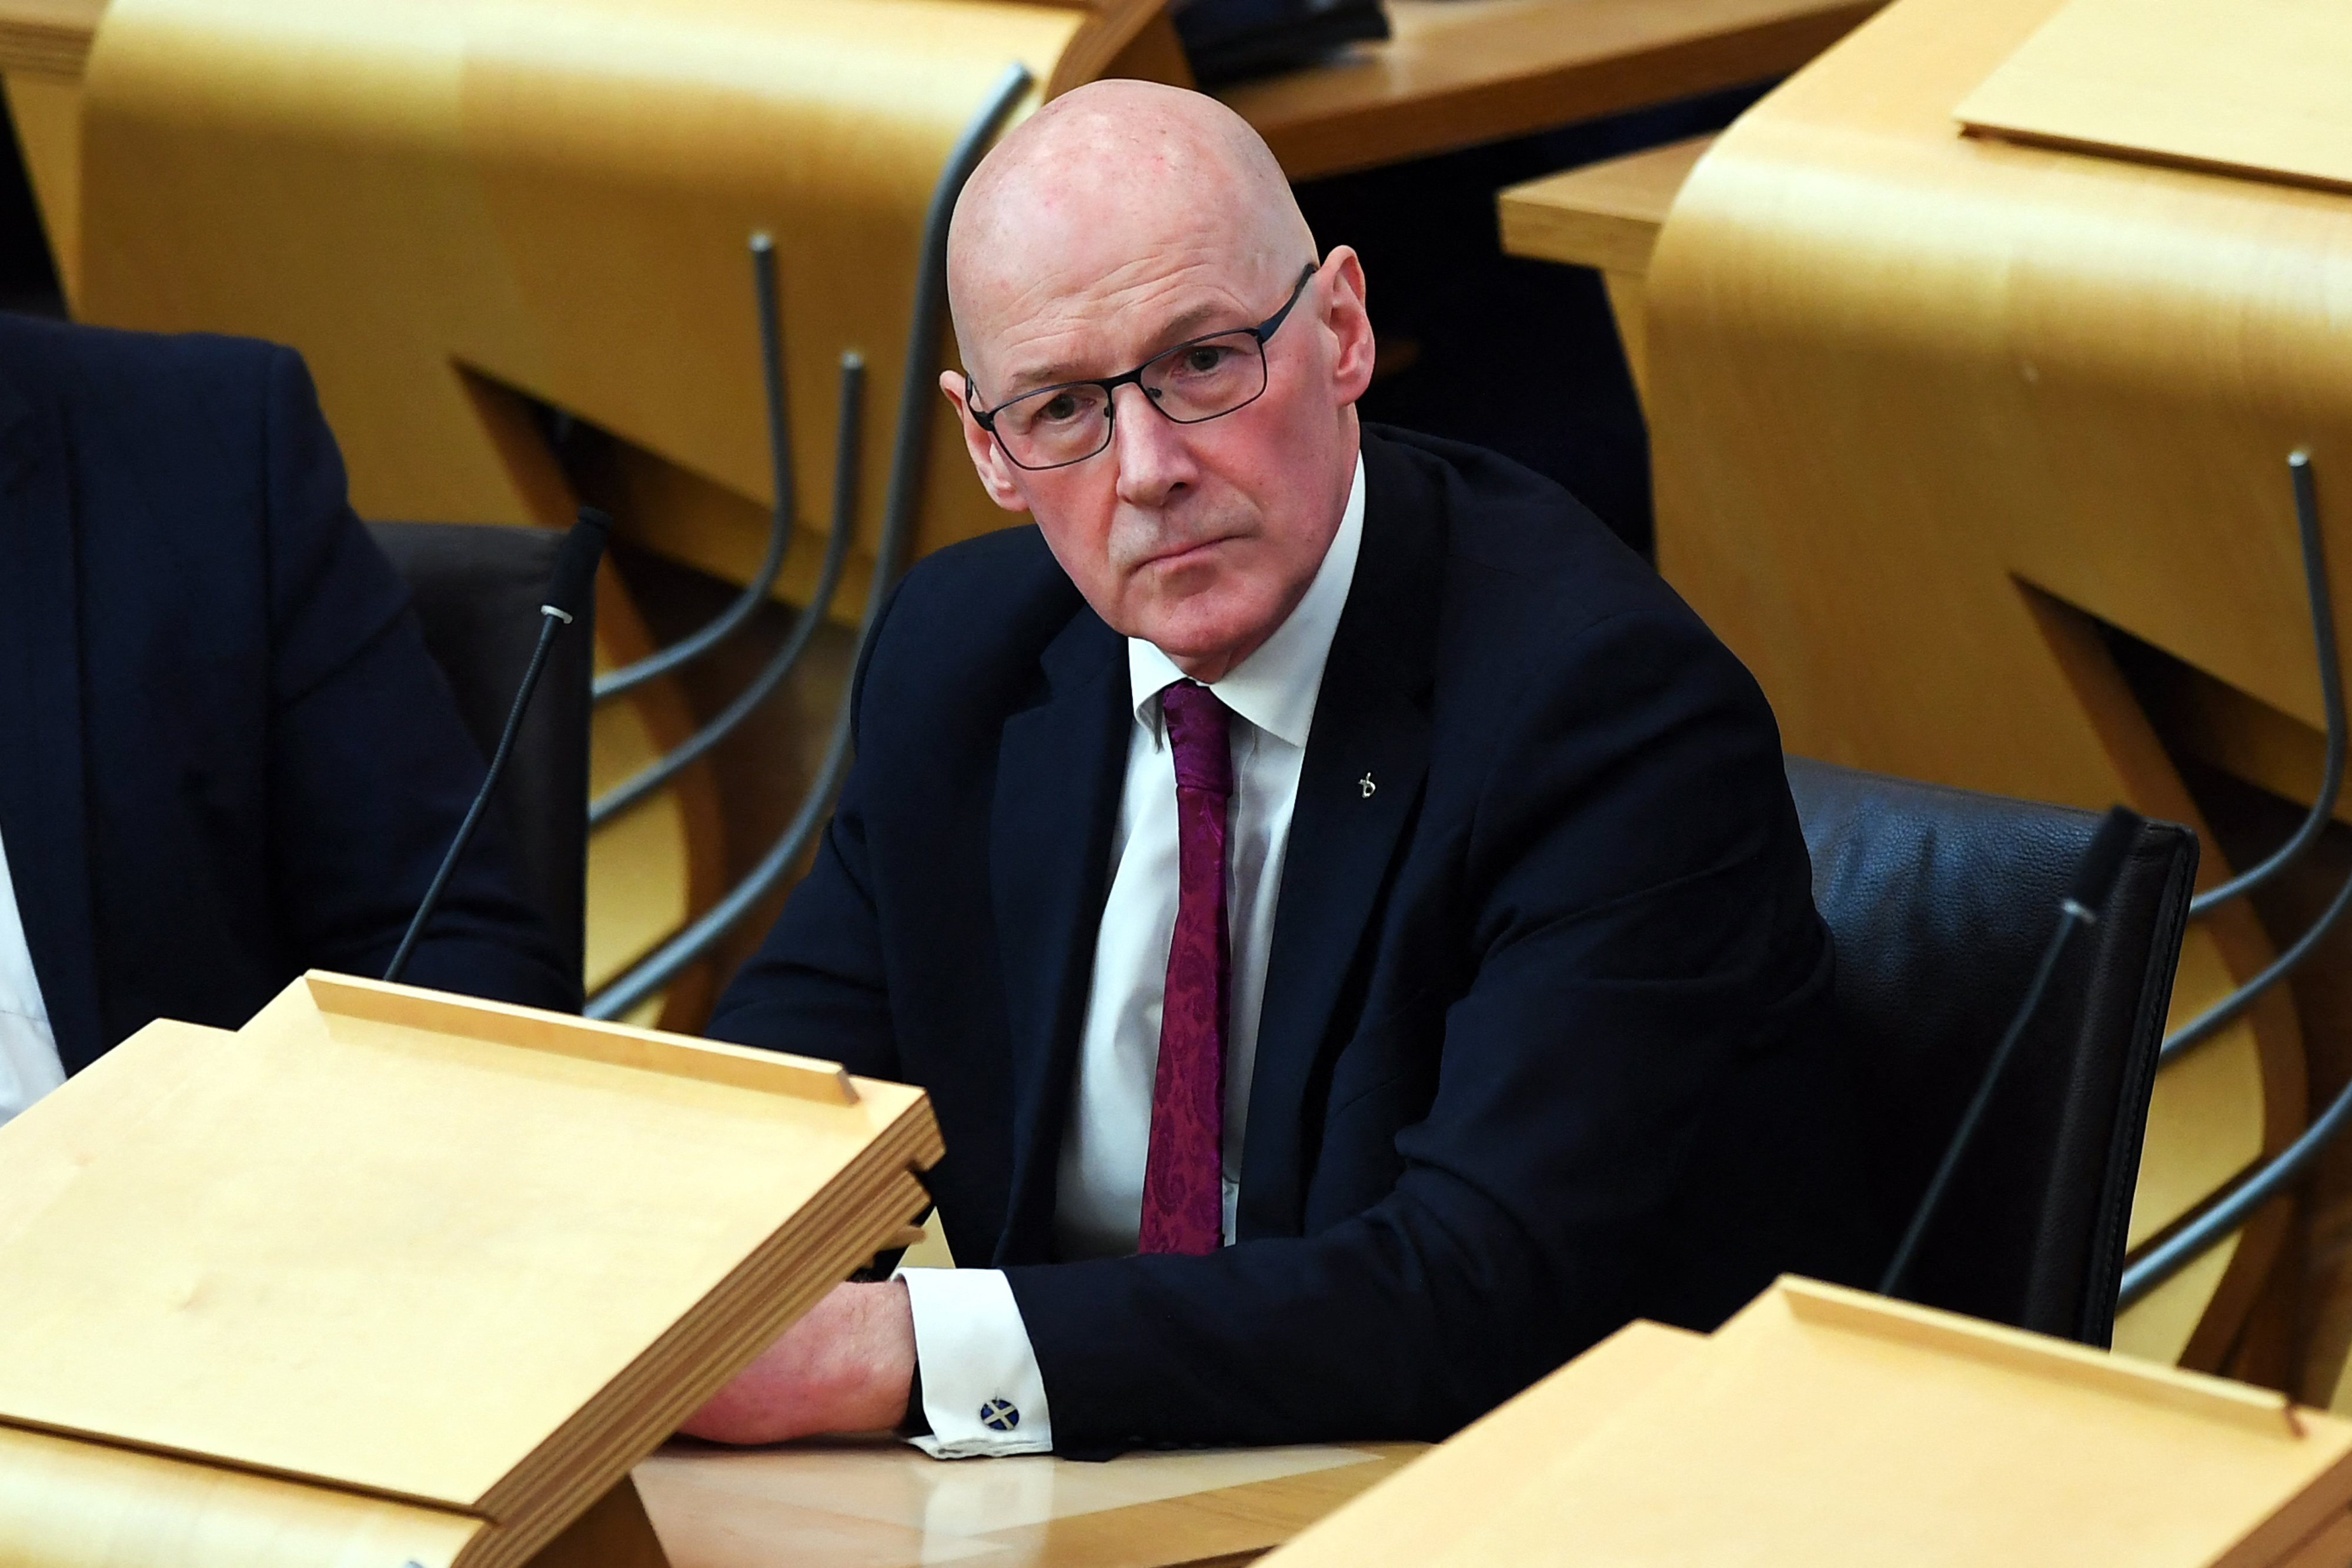 John Swinney could now face MSPs at First Minister's Questions on Thursday.